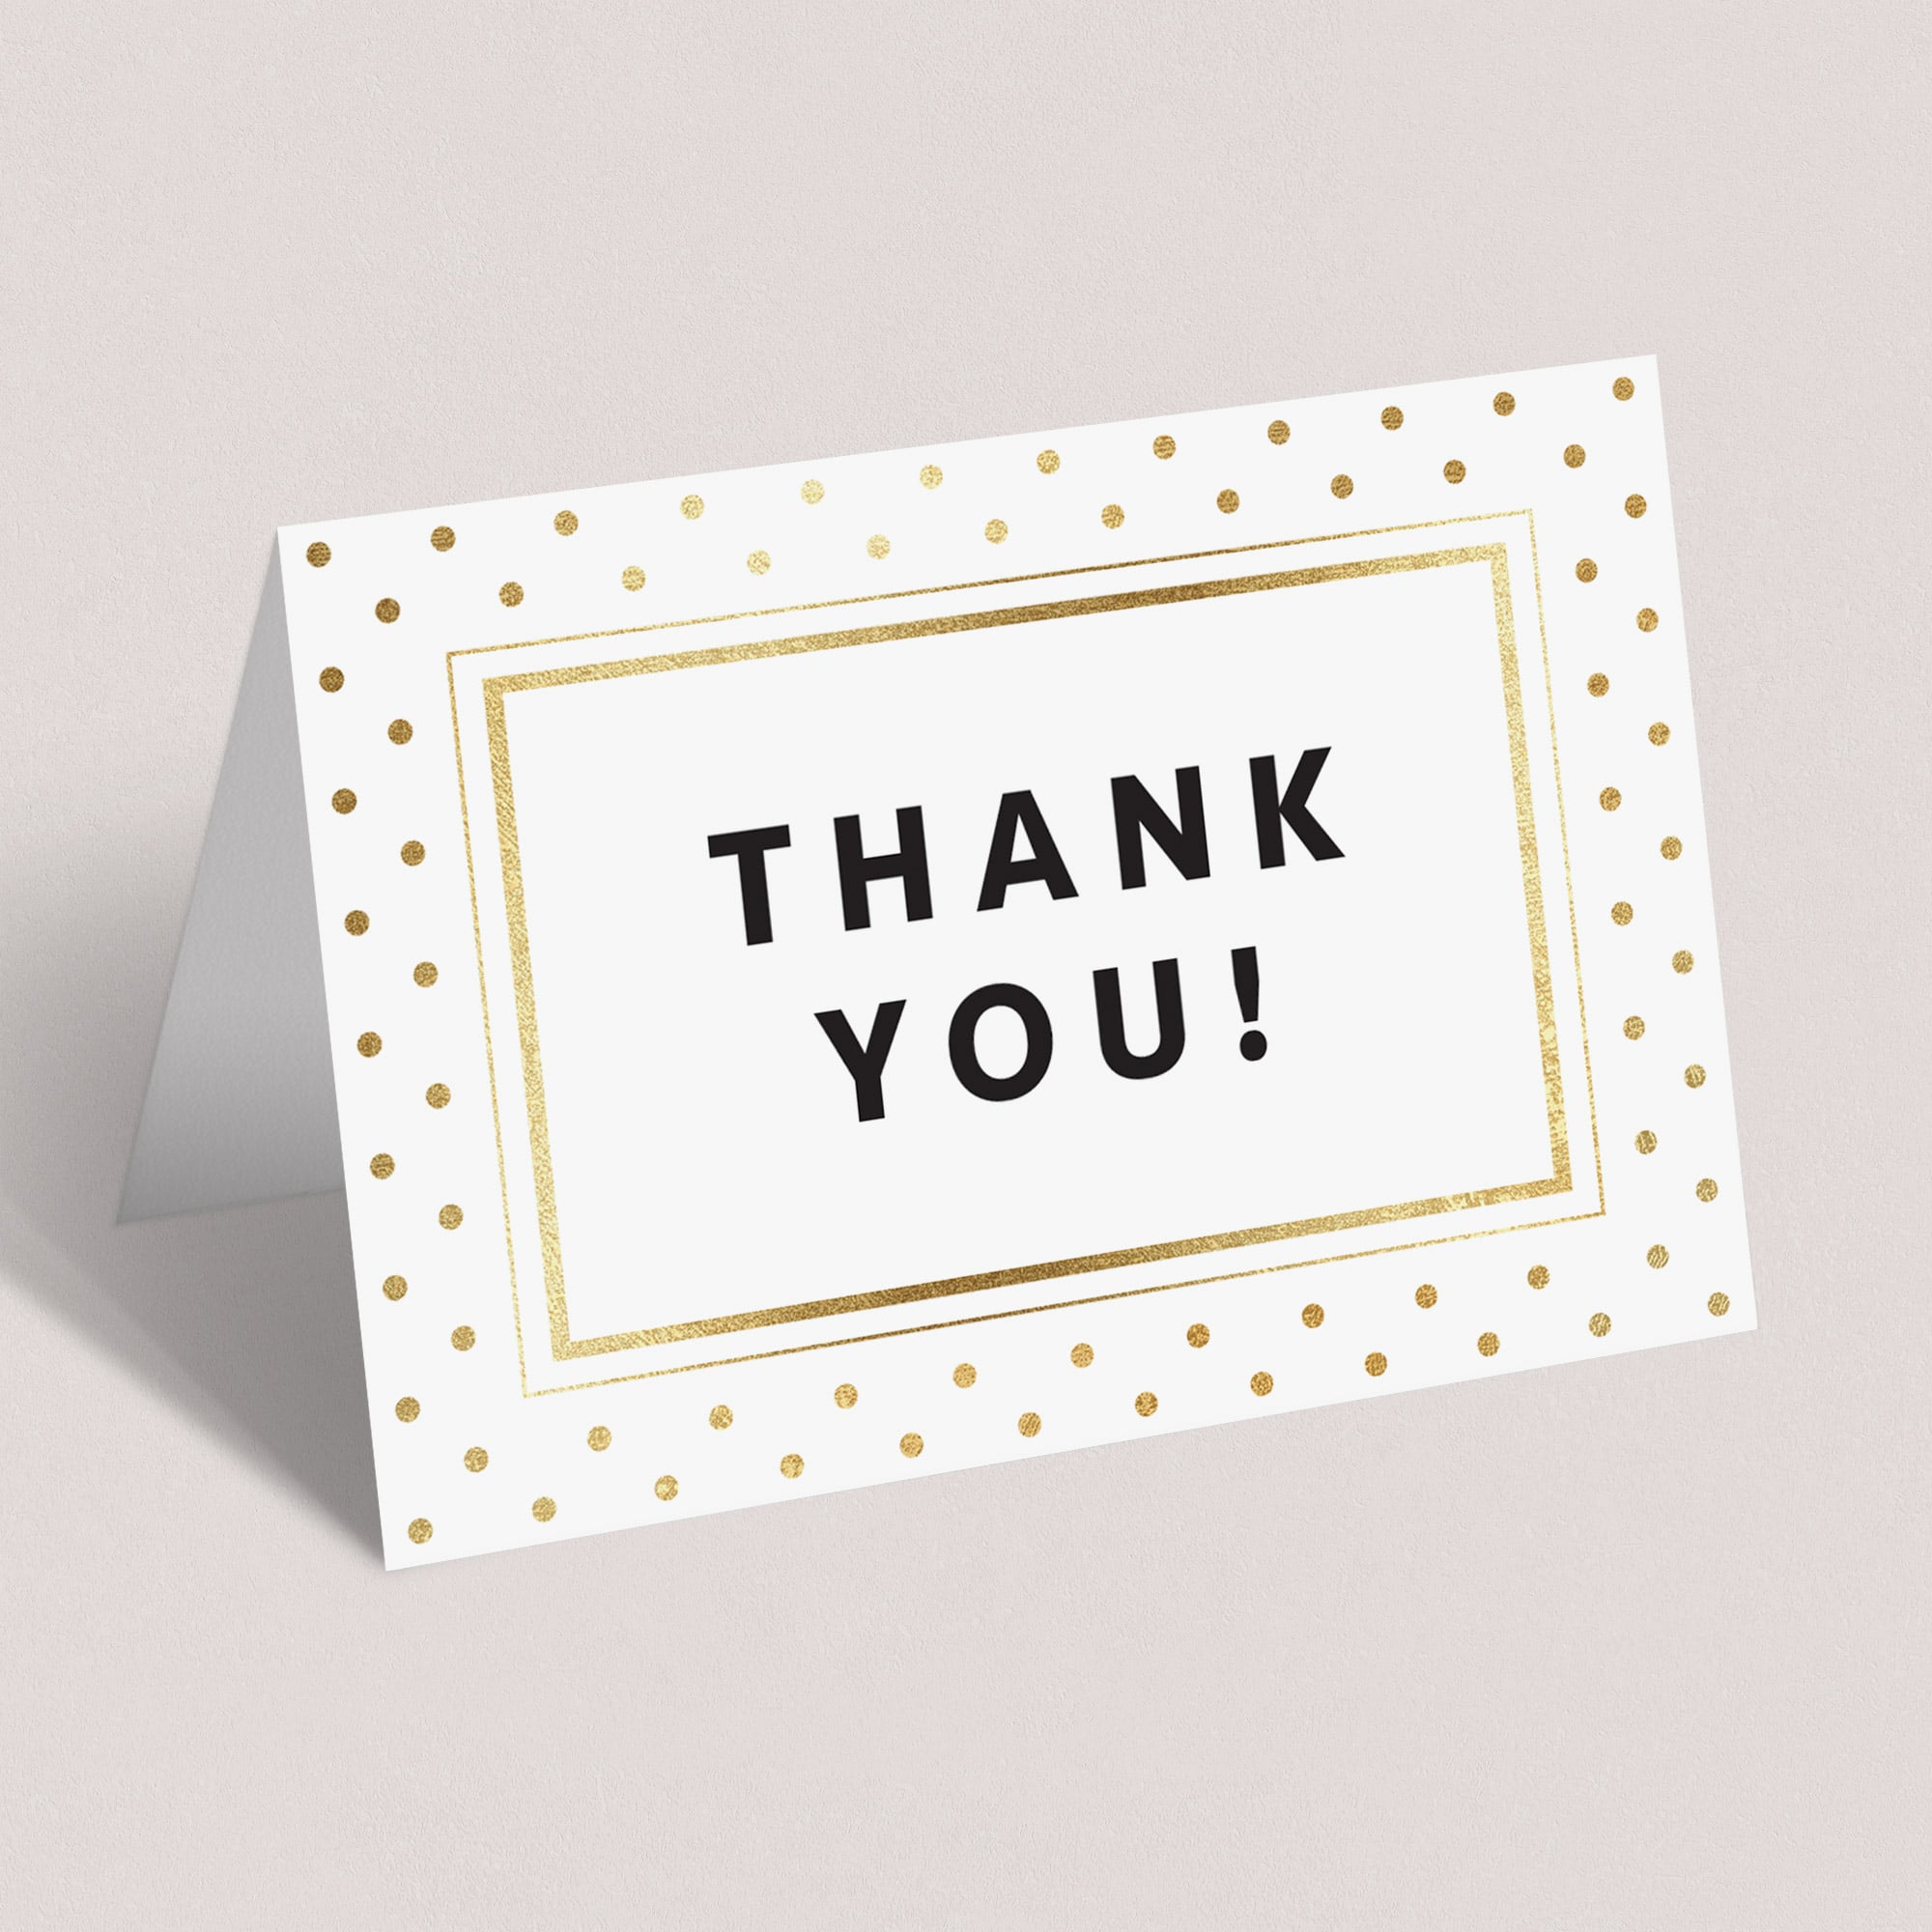 Thank you notes with gold polka dots by LittleSizzle